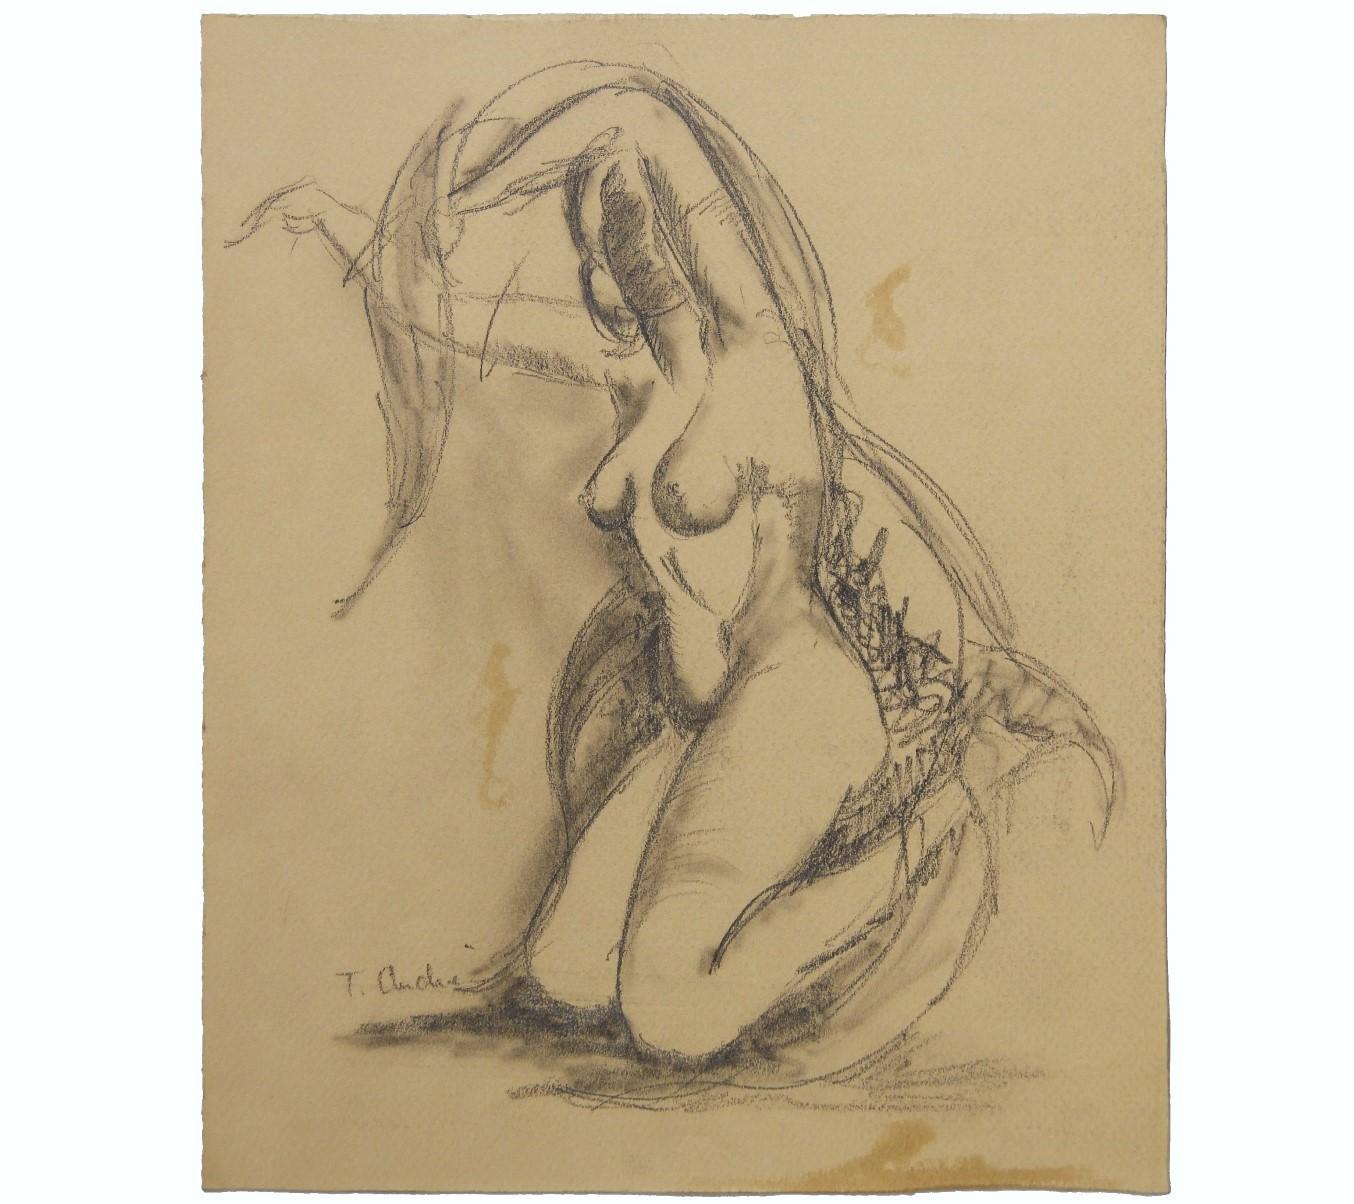 Seated Naturalistic Figurative Nude Study - Art by Thierry Andre